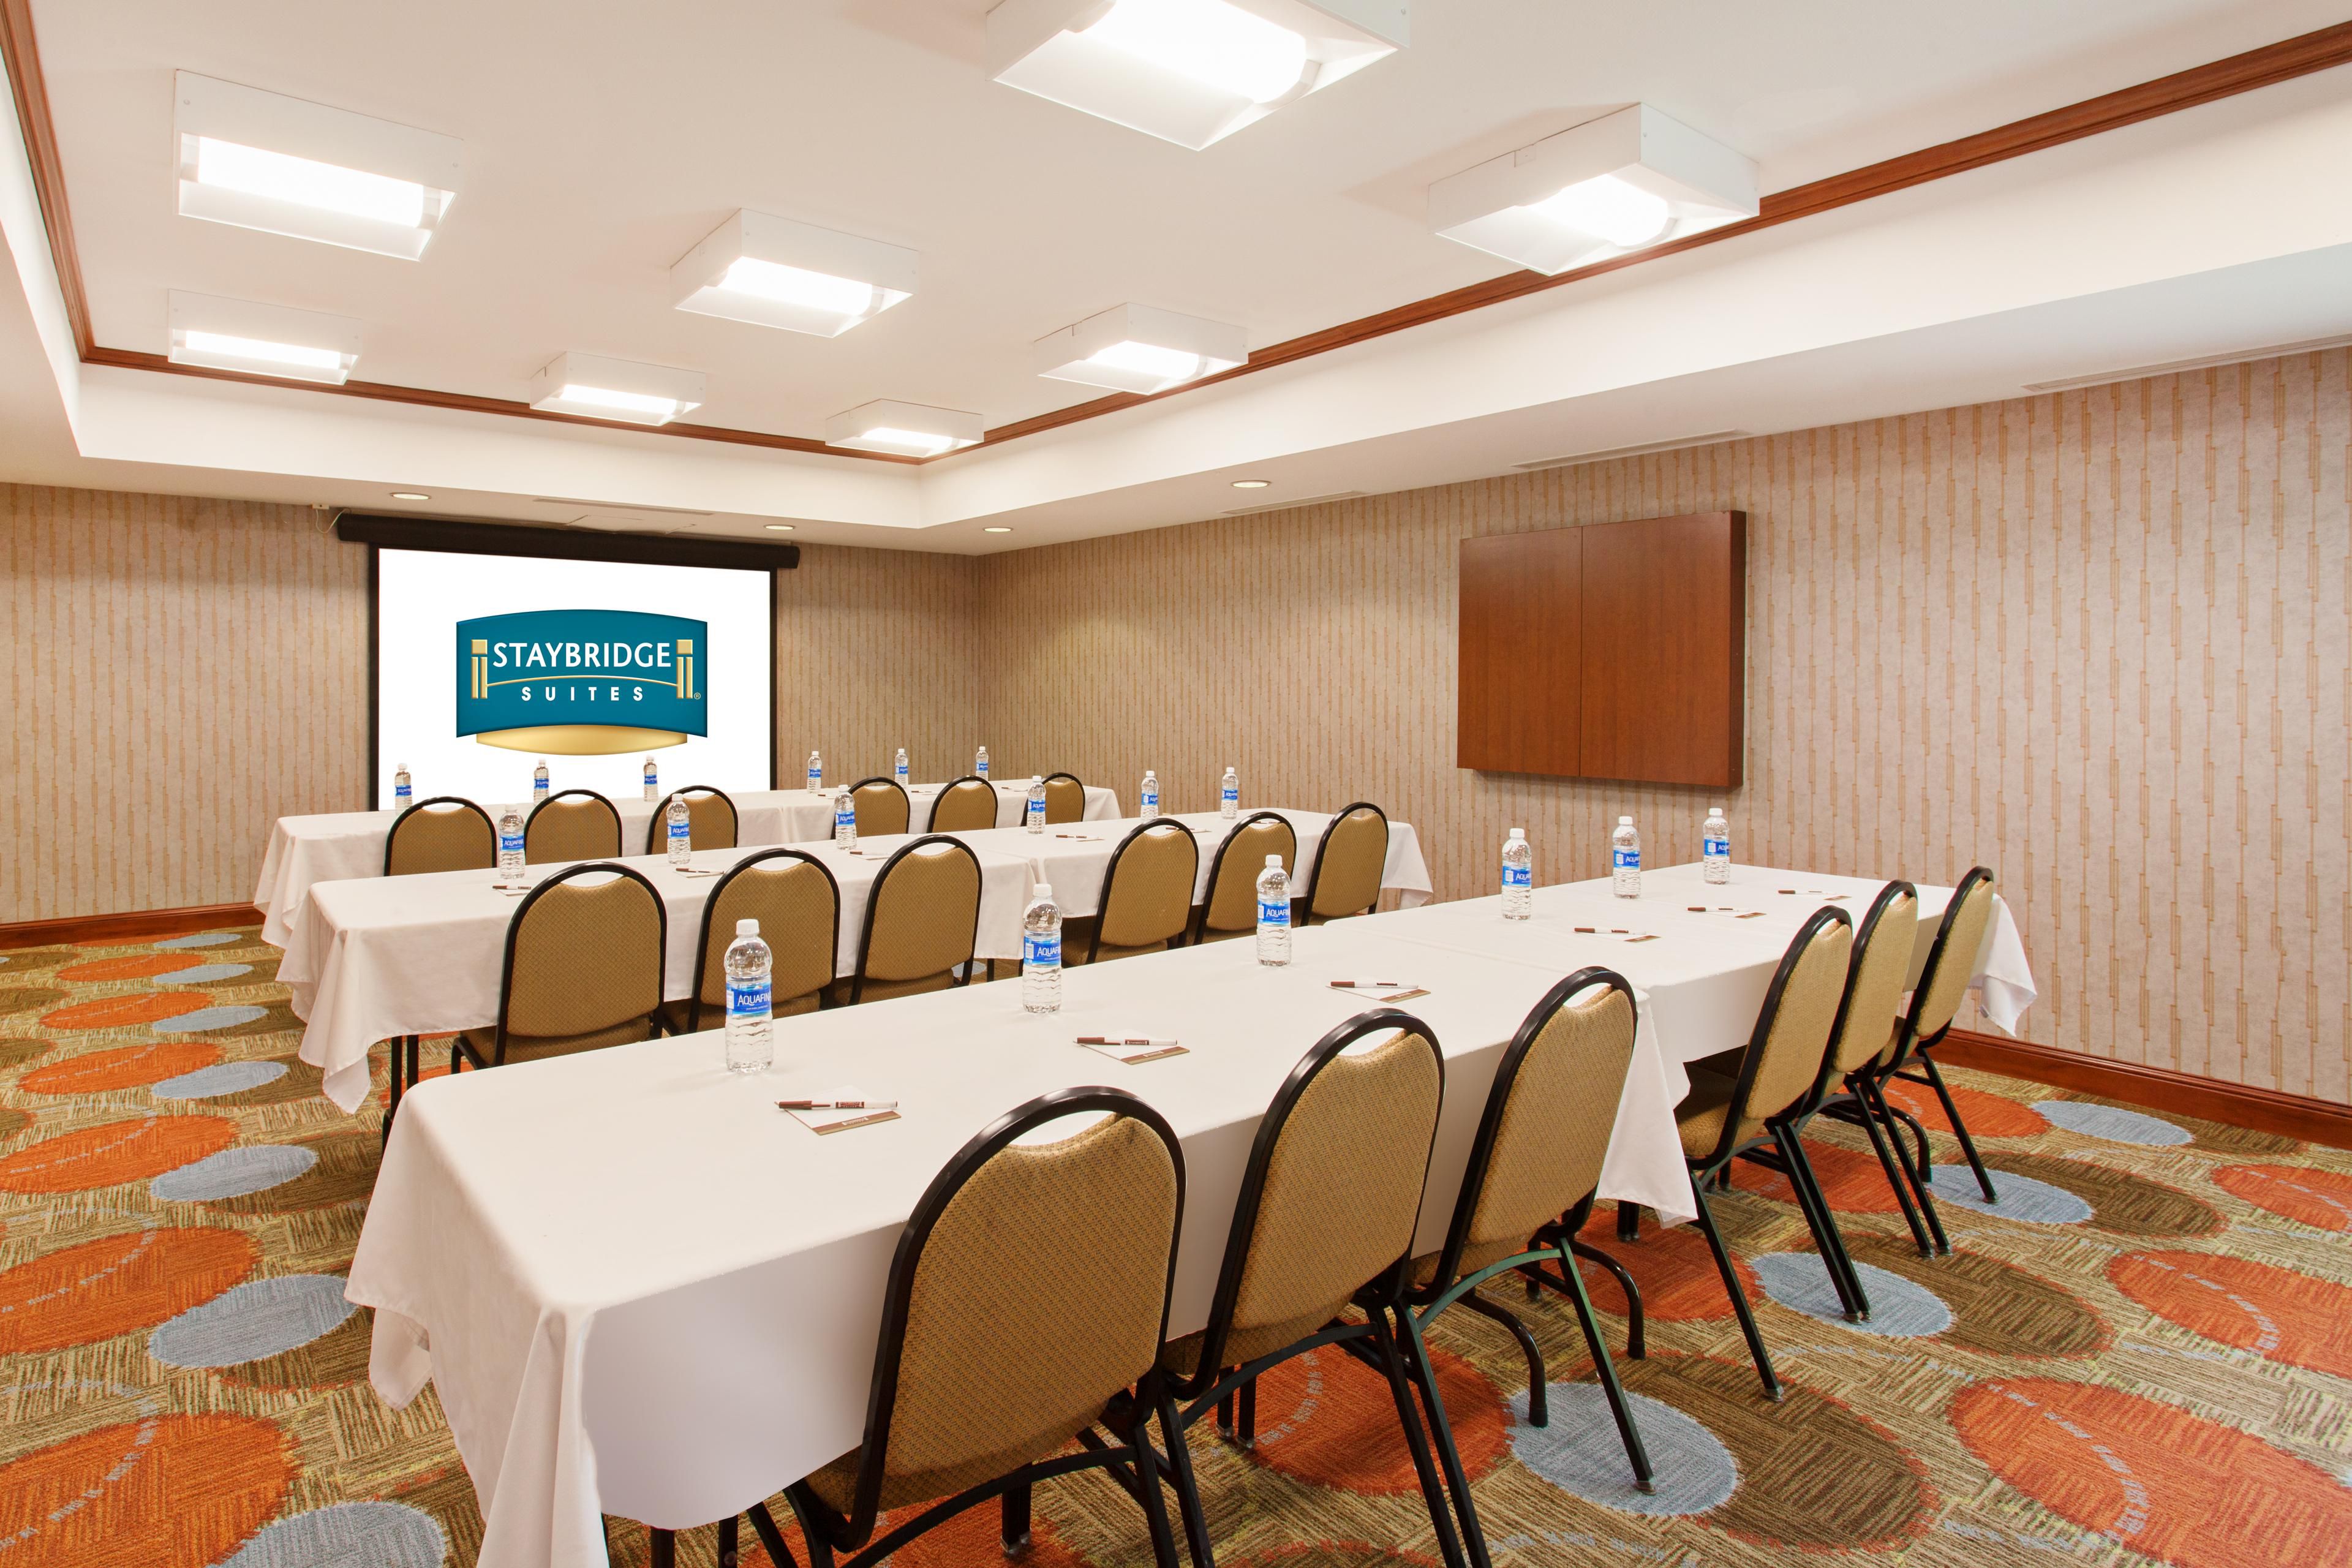 Contact the sales department to book your next meeting. Contact our Director of Sales, Teri Lee, at teri.lee@schultehospitality.com to reserve your space today. 